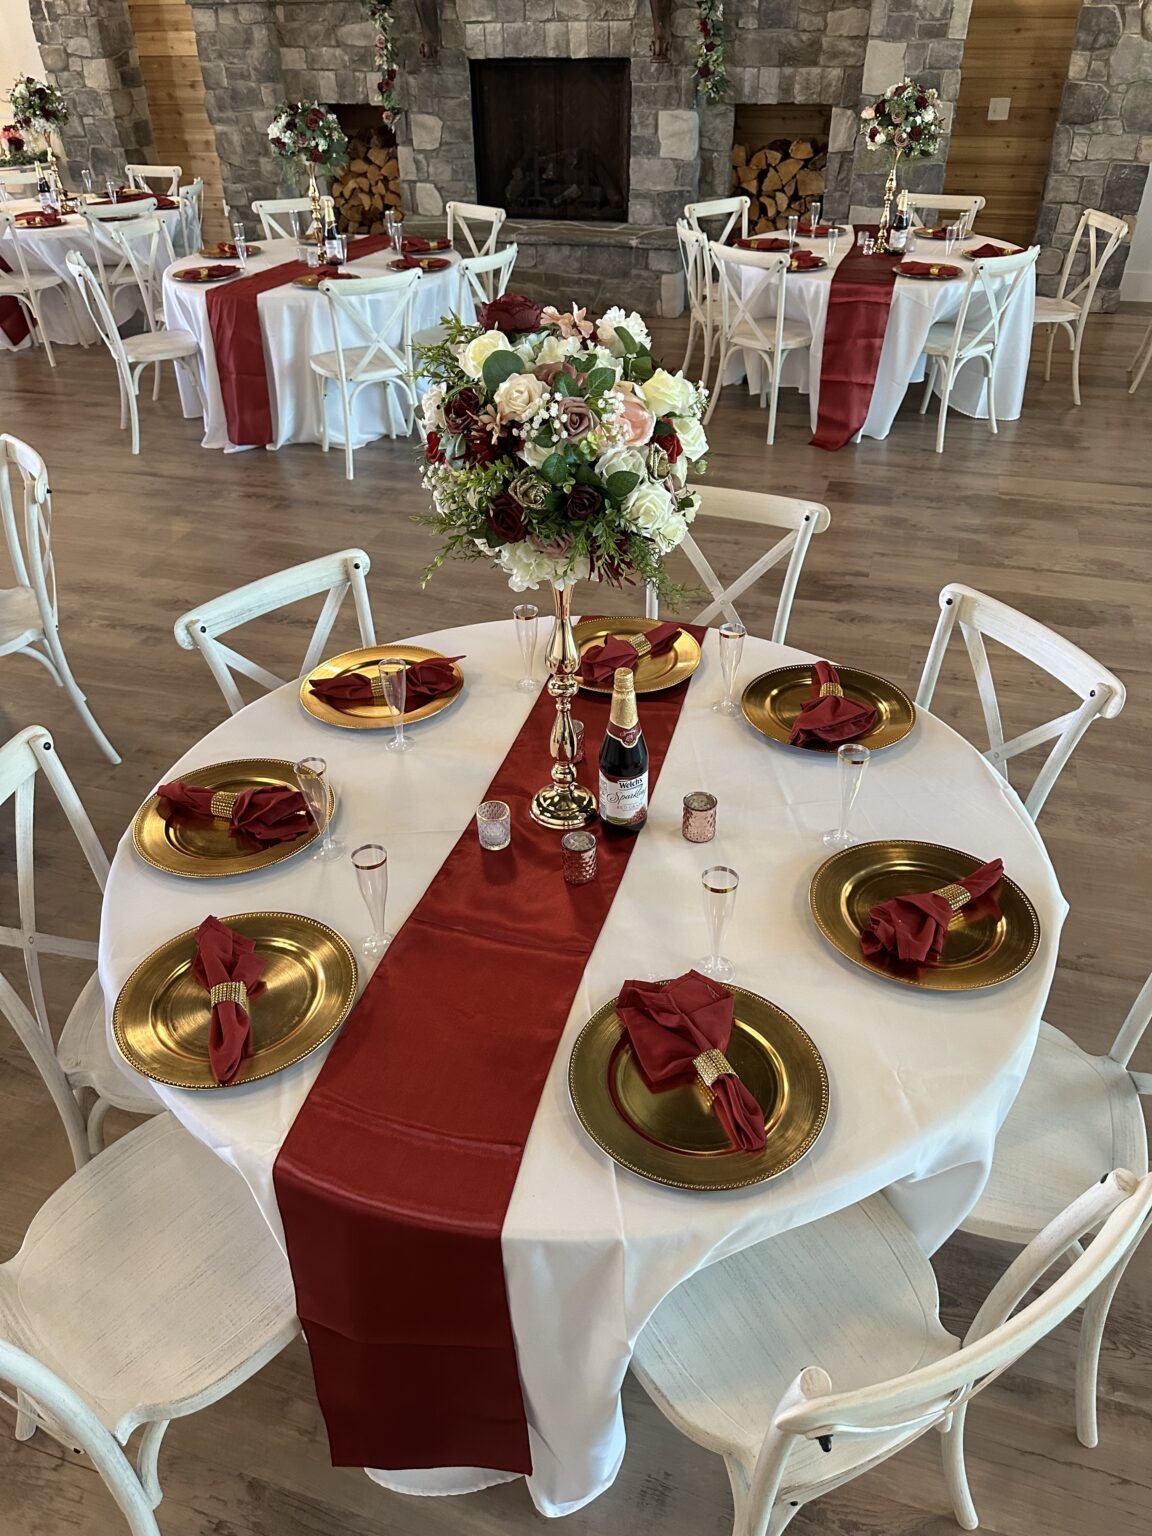 A table set up with plates and napkins